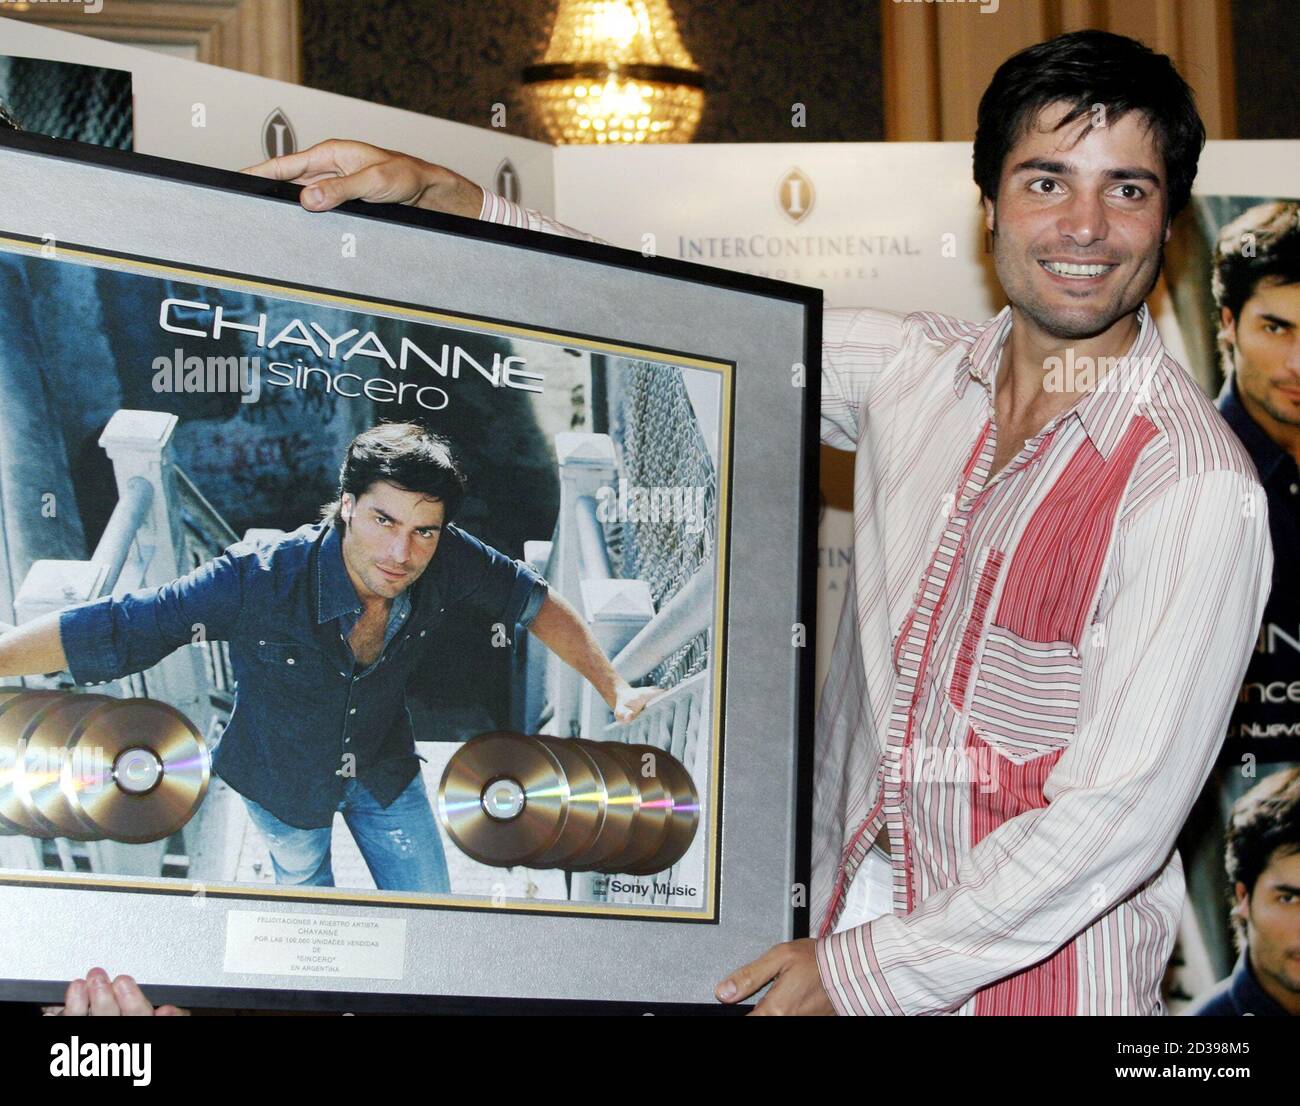 Puerto Rican singer and actor Chayanne, born Elmer Figueroa Arce, shows the cover of his latest album "Sincero" during a press conference in Buenos Aires, Argentina, March 8, 2004. Chayanne announced a North American tour that will take him across the United States through April, 2004. REUTERS/Enrique Marcarian  EM Foto de stock